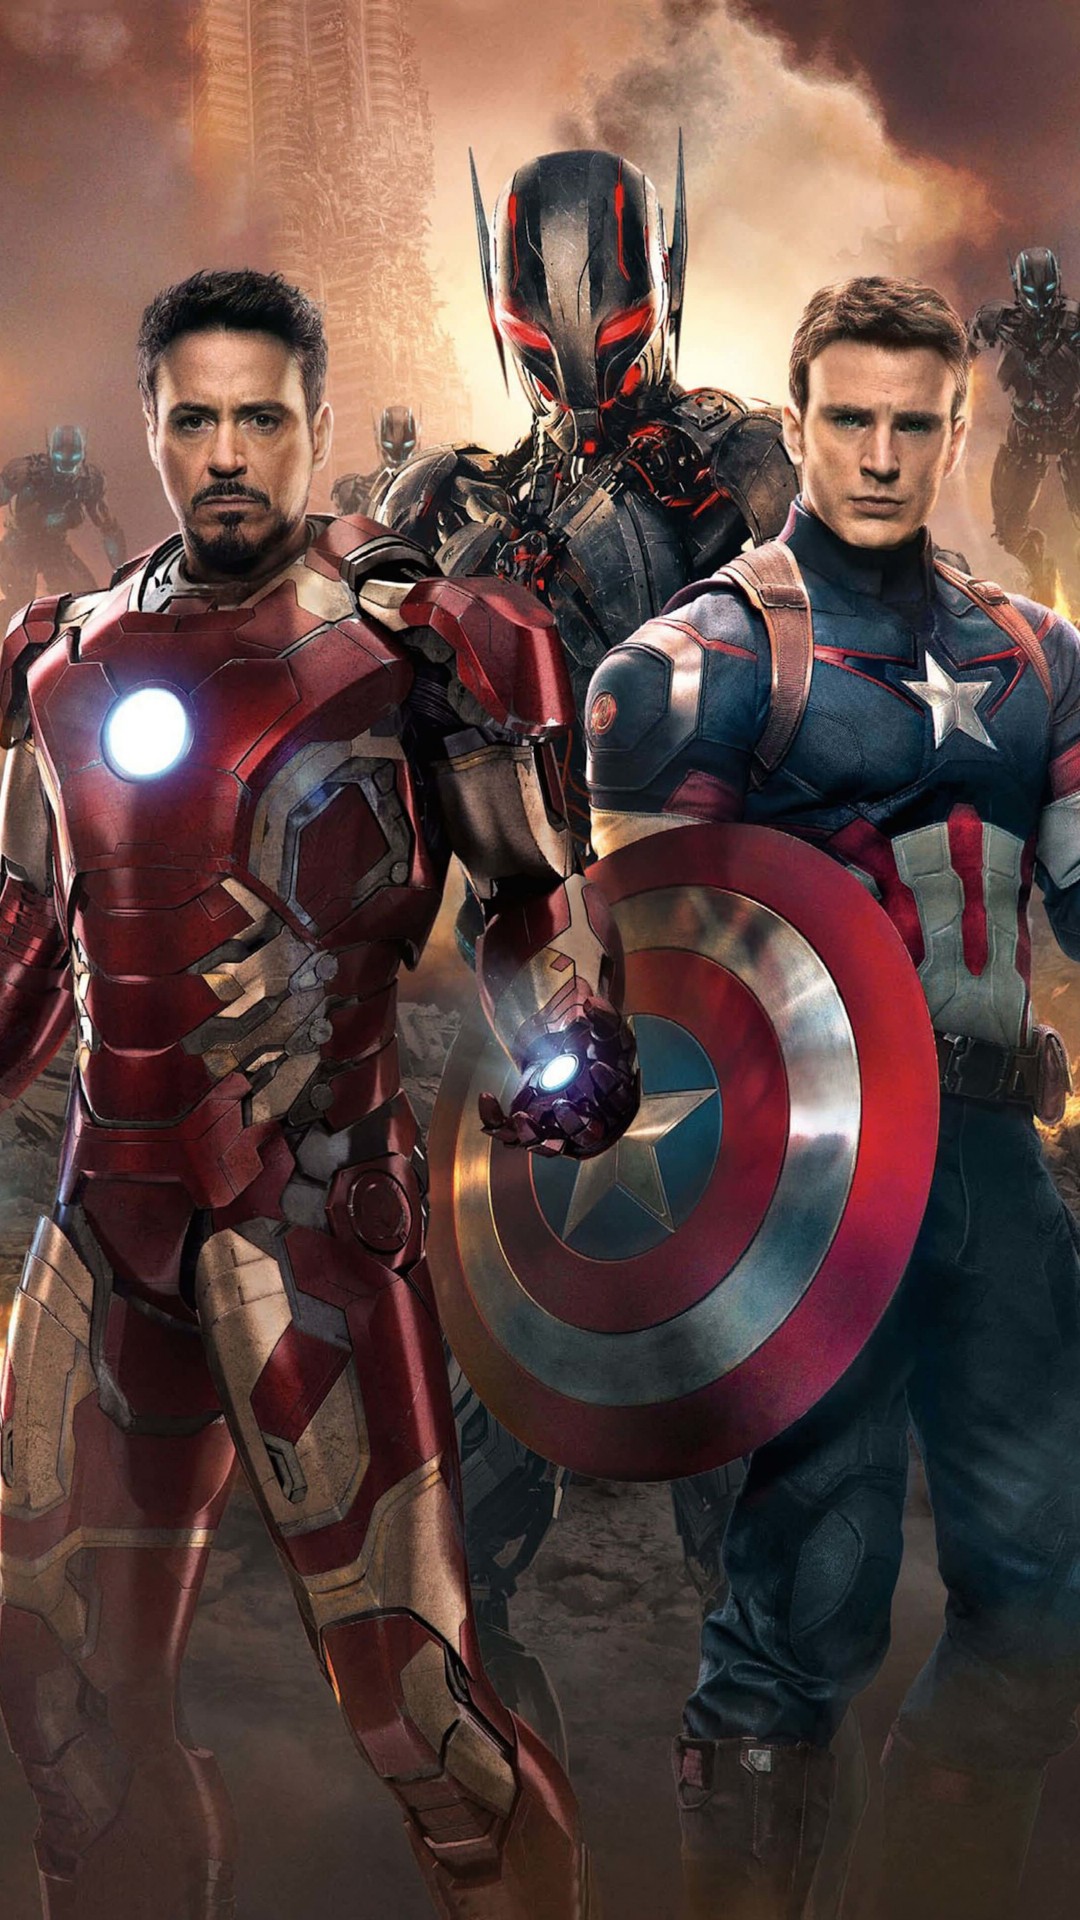 The Avengers: Age of Ultron - Iron Man and Captain America Wallpaper for Google Nexus 5X